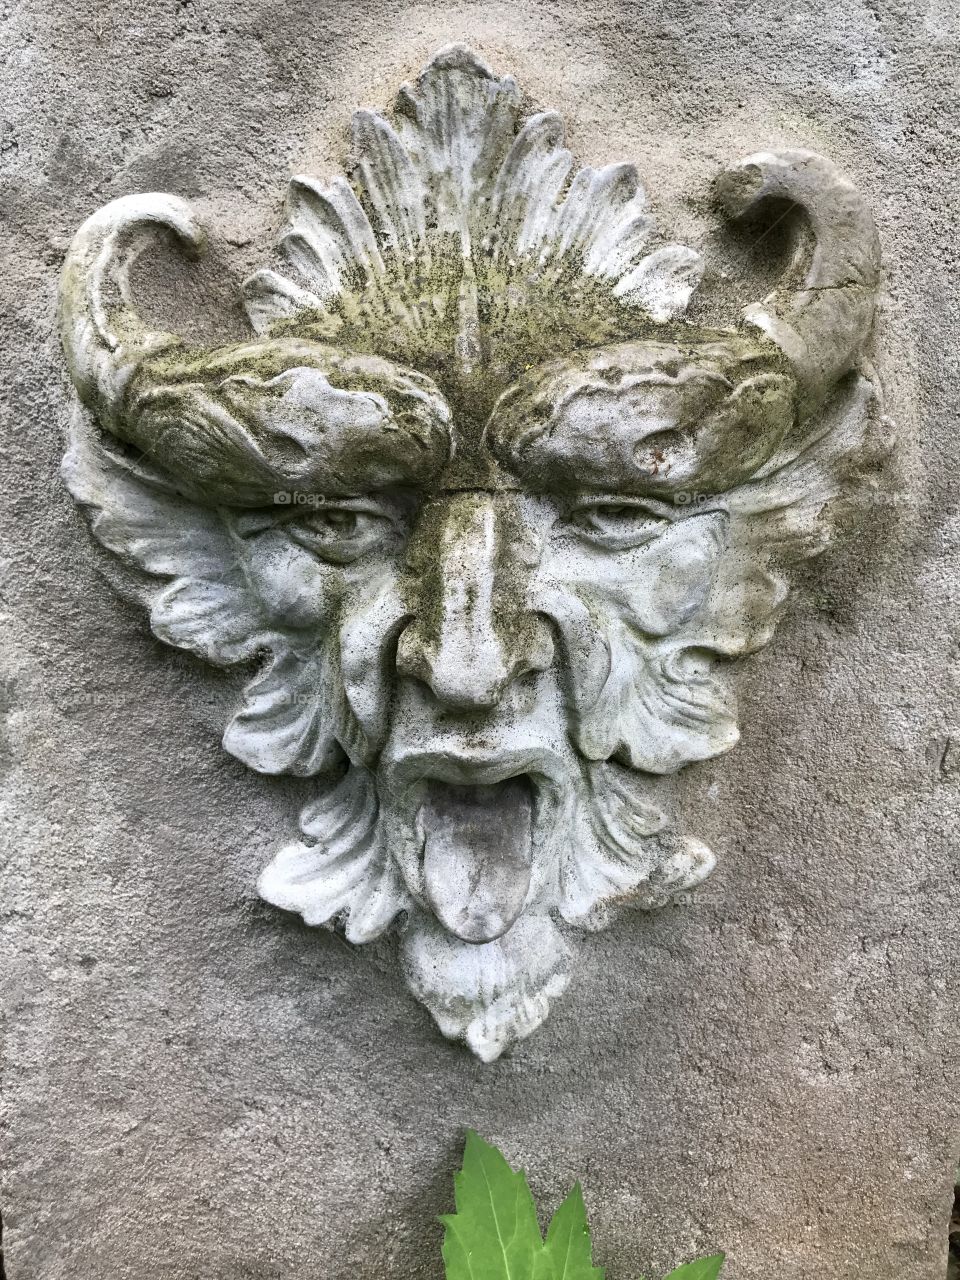 Mossy stone carved face